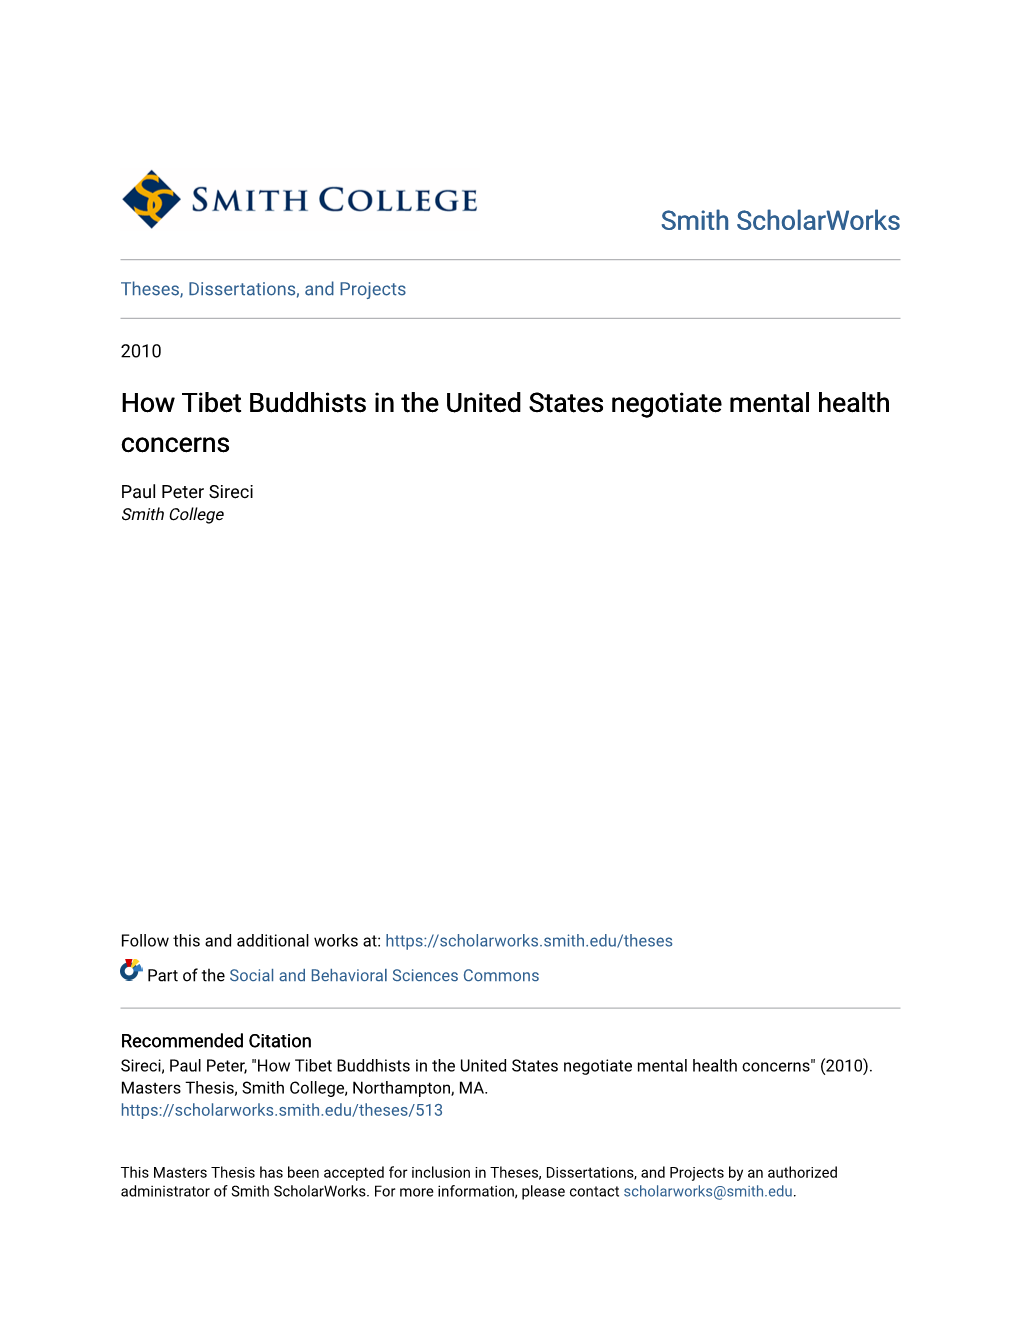 How Tibet Buddhists in the United States Negotiate Mental Health Concerns